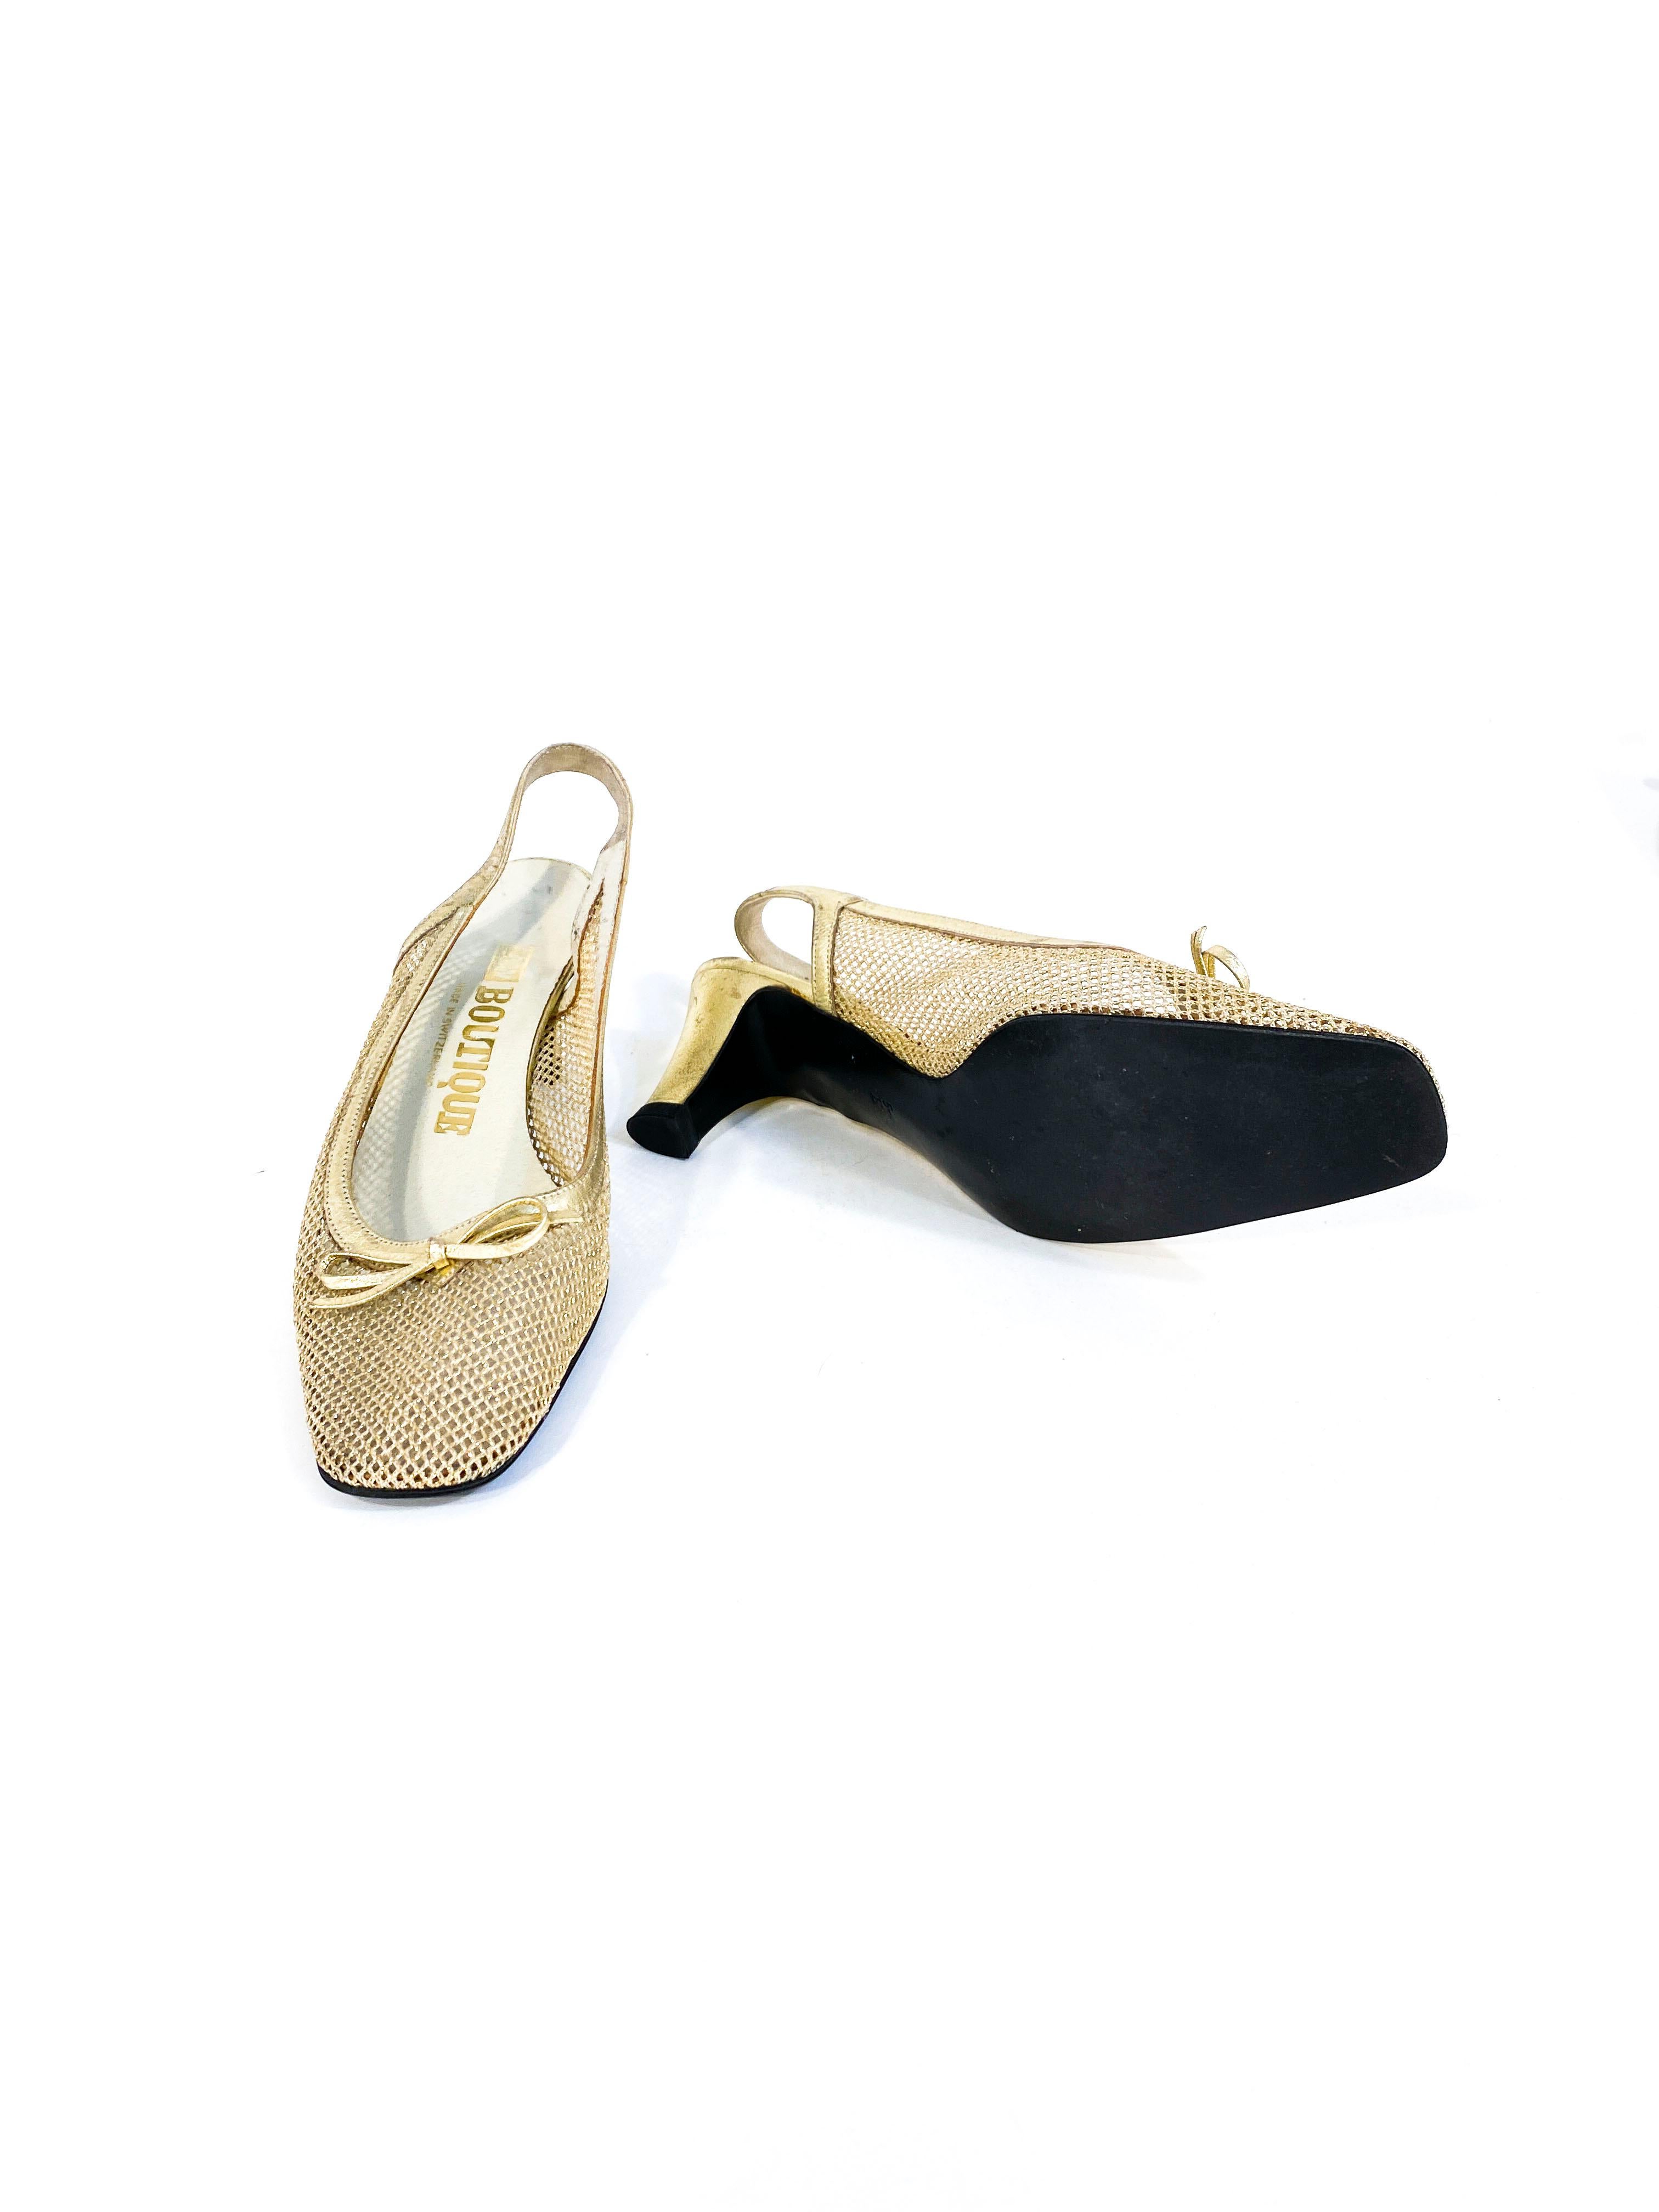 Women's 1970s Gold Metallic Mesh and Leather Heels For Sale